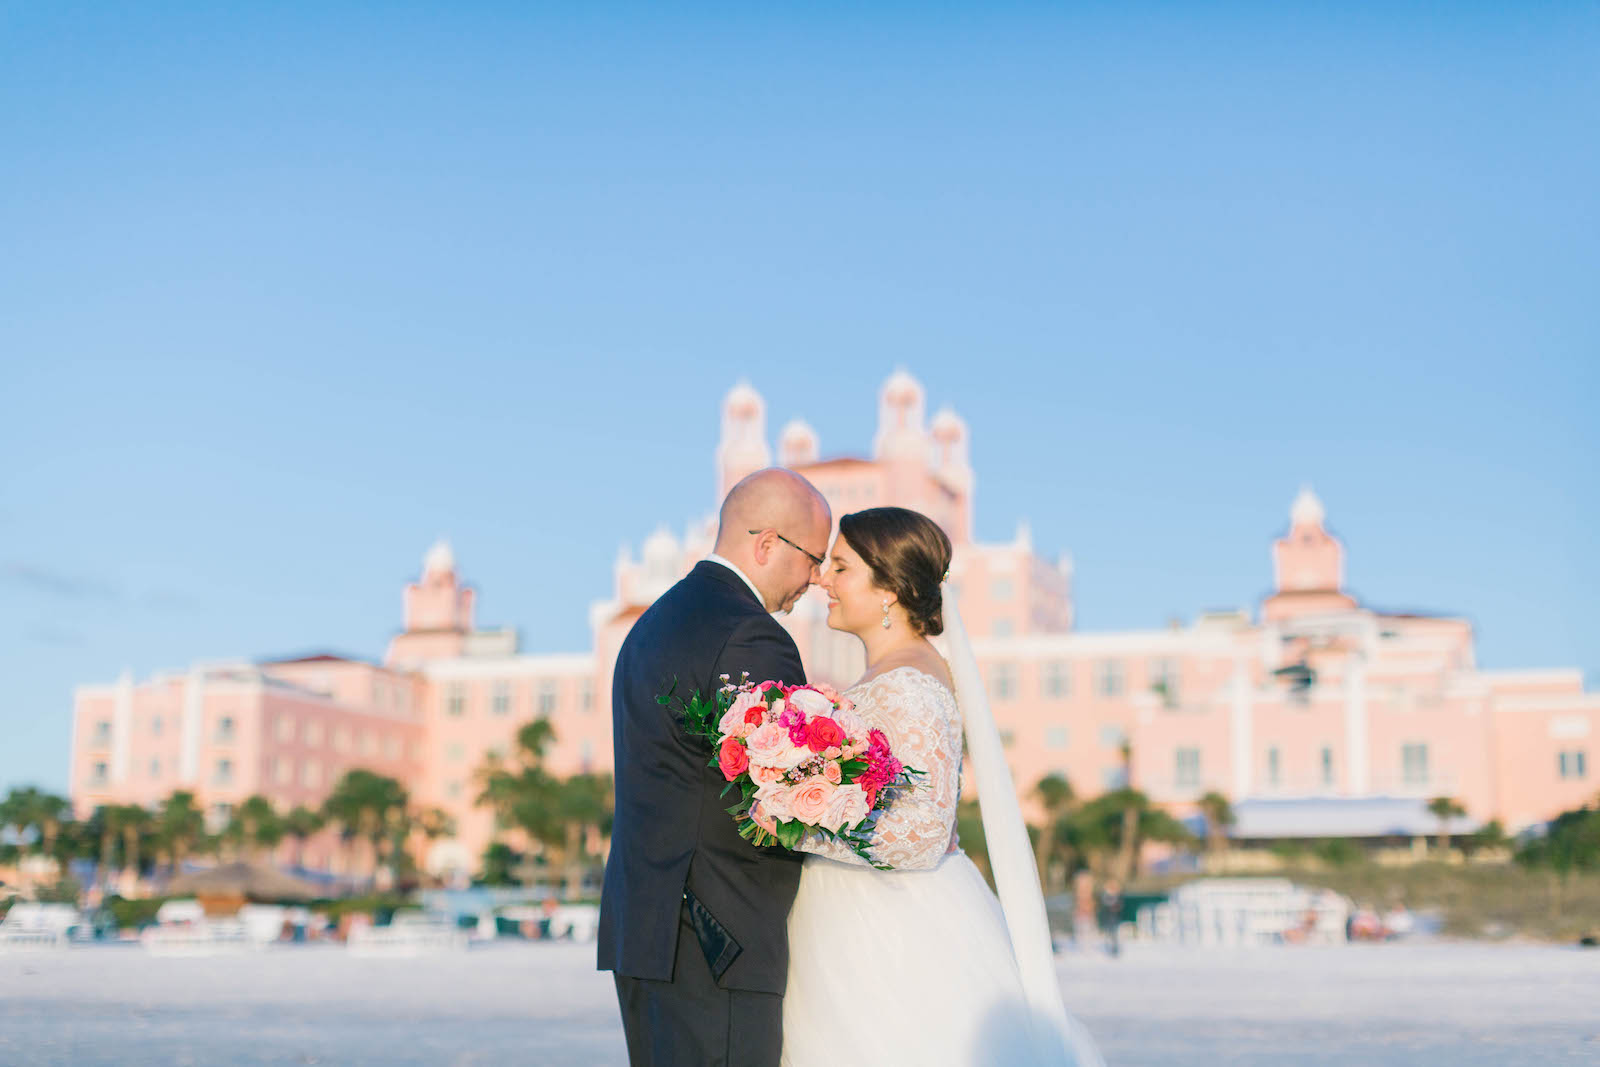 Florida Bride and Groom on Beach with Vibrant Pink Floral Bouquet | Historic Downtown St. Pete Wedding Venue The Don Cesar | Tampa Bay Wedding Florist Bruce Wayne Florals